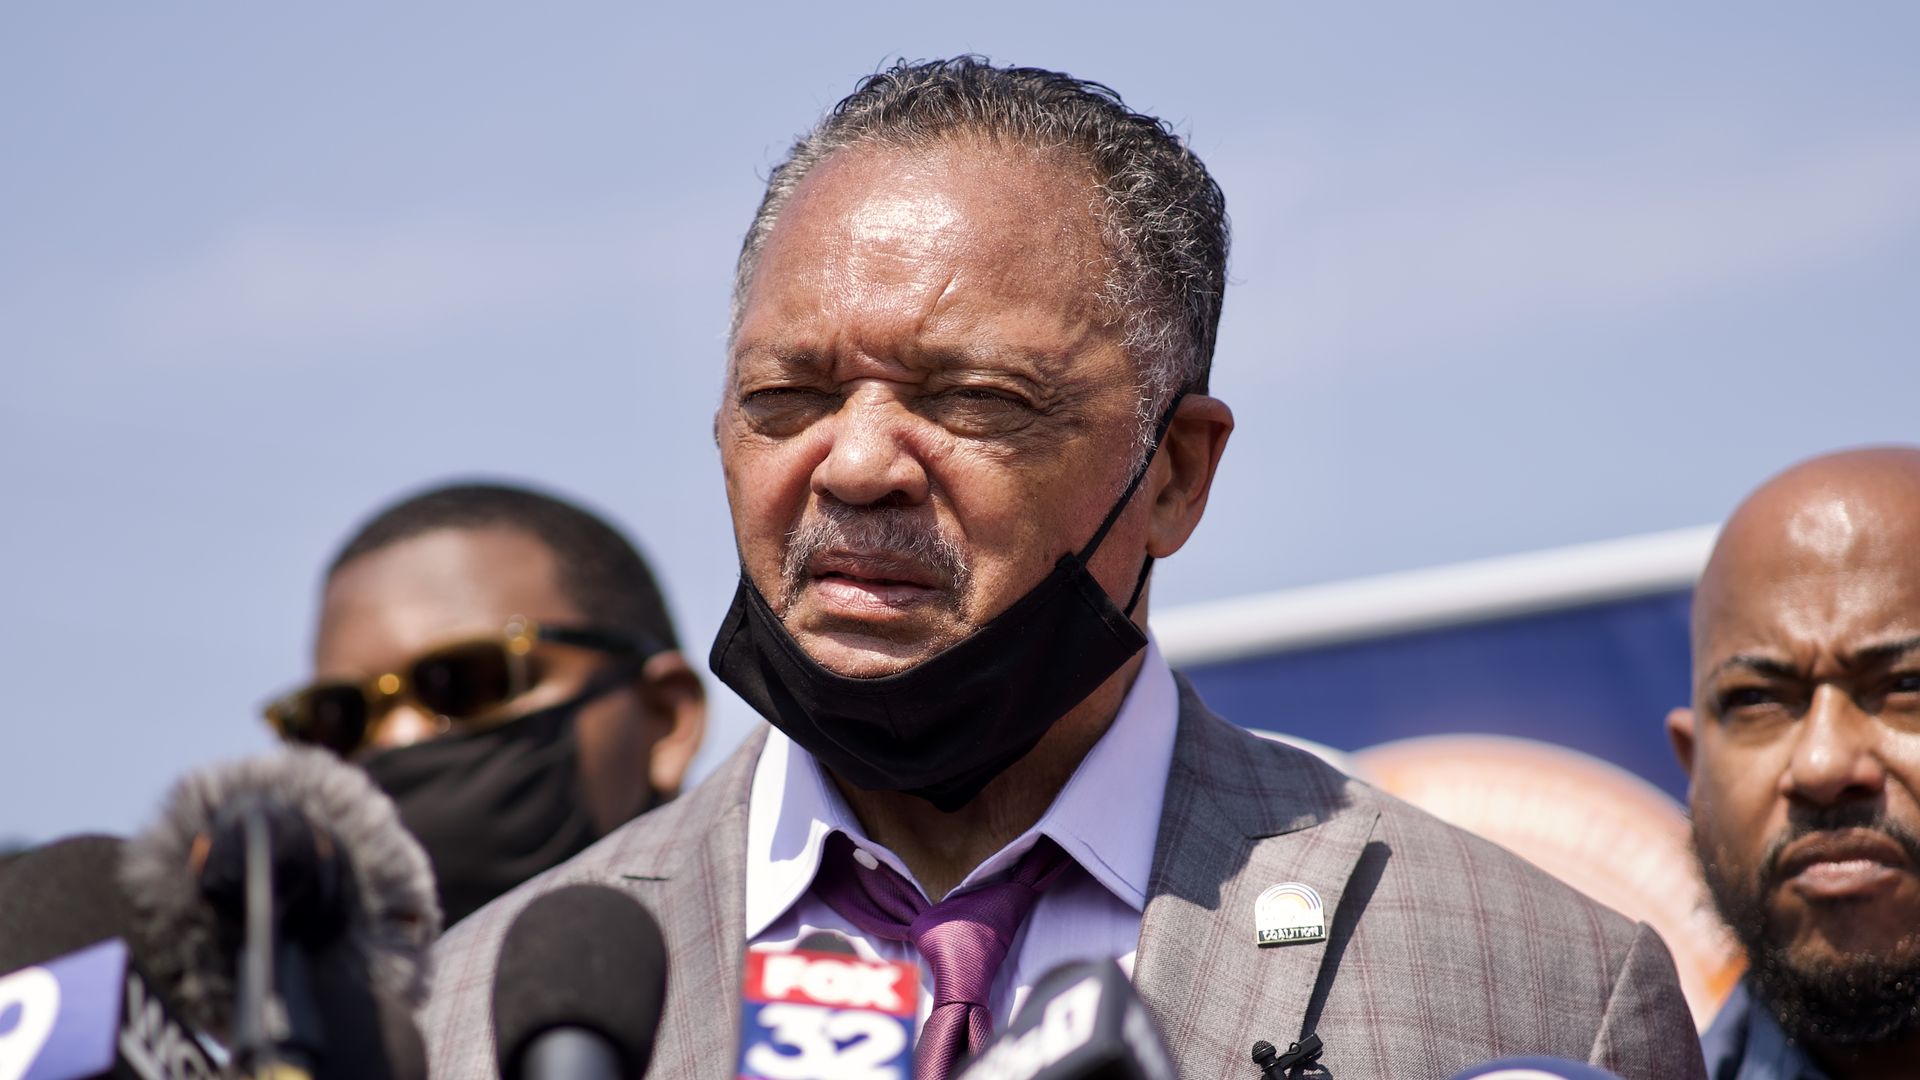 Jesse Jackson (C), at a press conference in Kenosha, Wisconsin, on August 27, 2020, to address the police shooting of Jacob Blake, Jr., on August 23